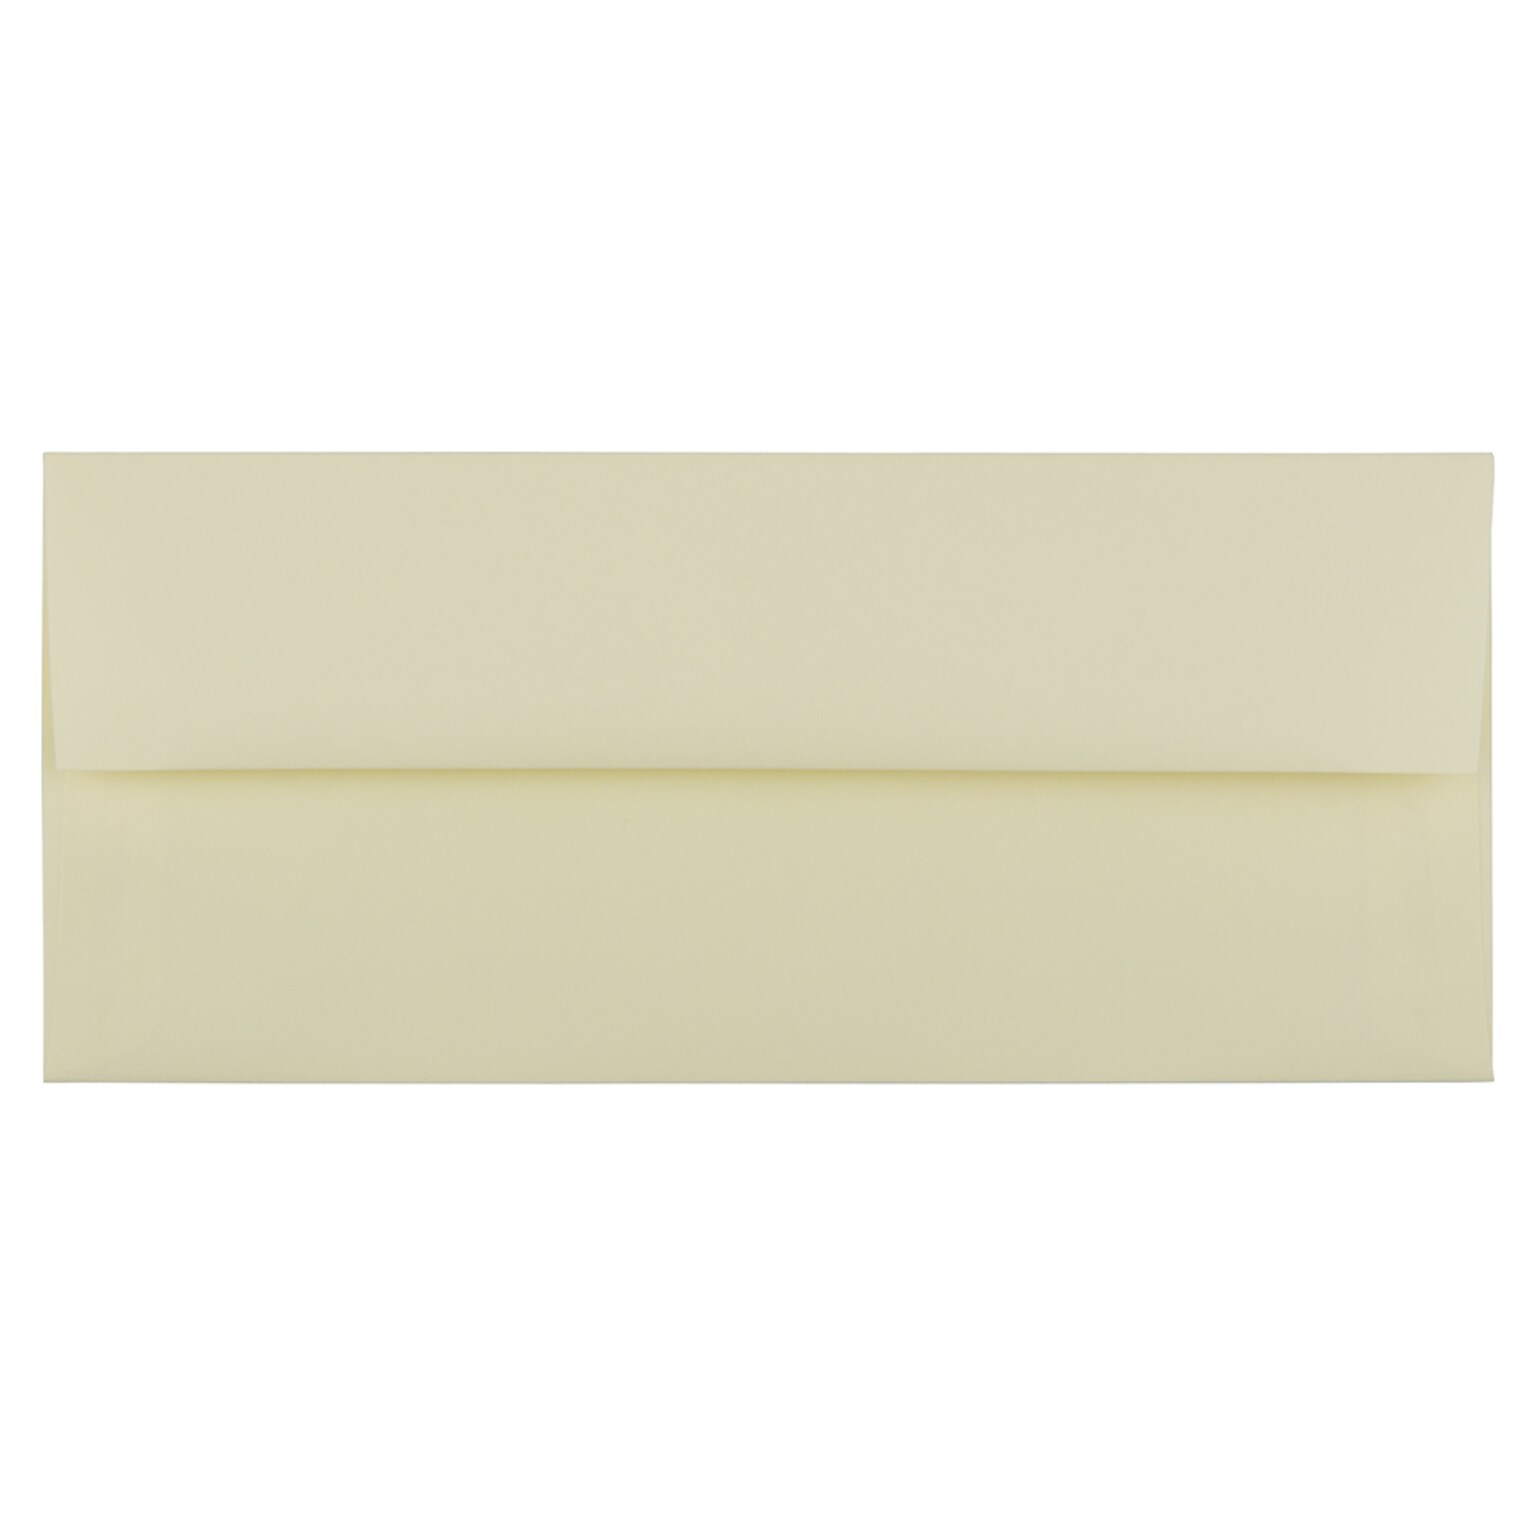 JAM Paper Strathmore Open End #10 Business Envelope, 4 1/8 x 9 1/2, Ivory Wove, 500/Pack (191165H)